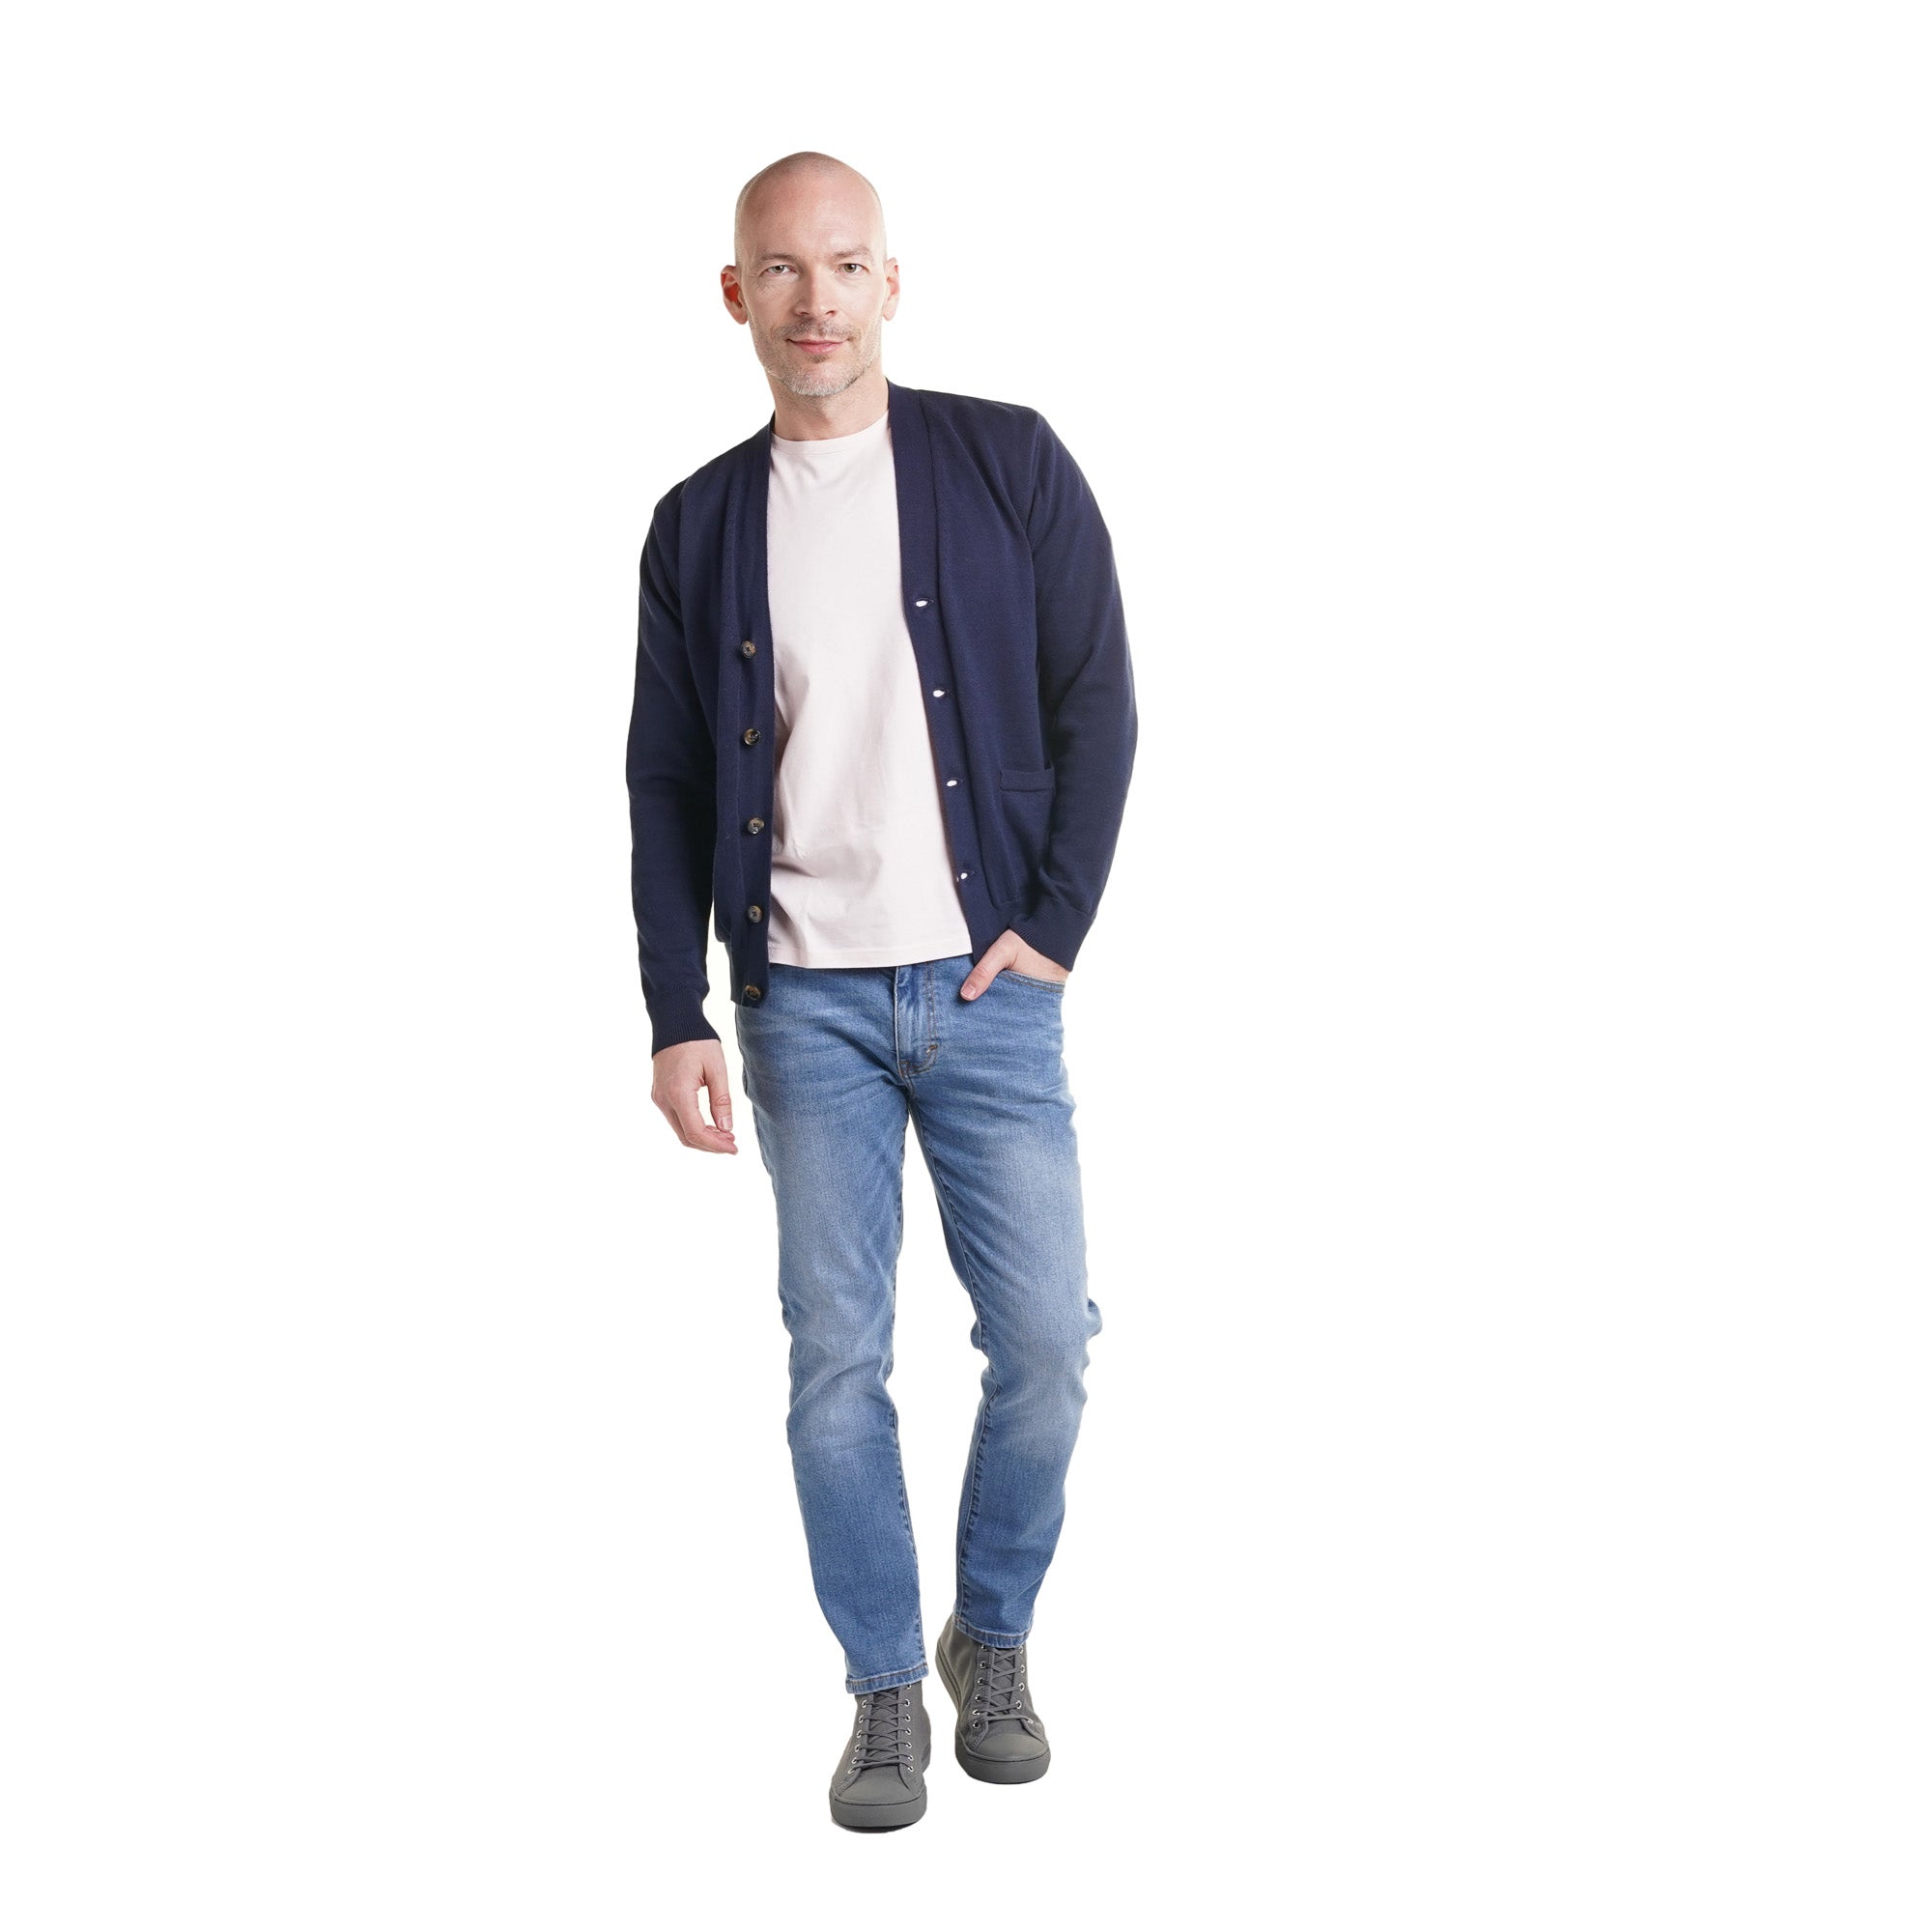 Cardigan with t-shirt and jeans